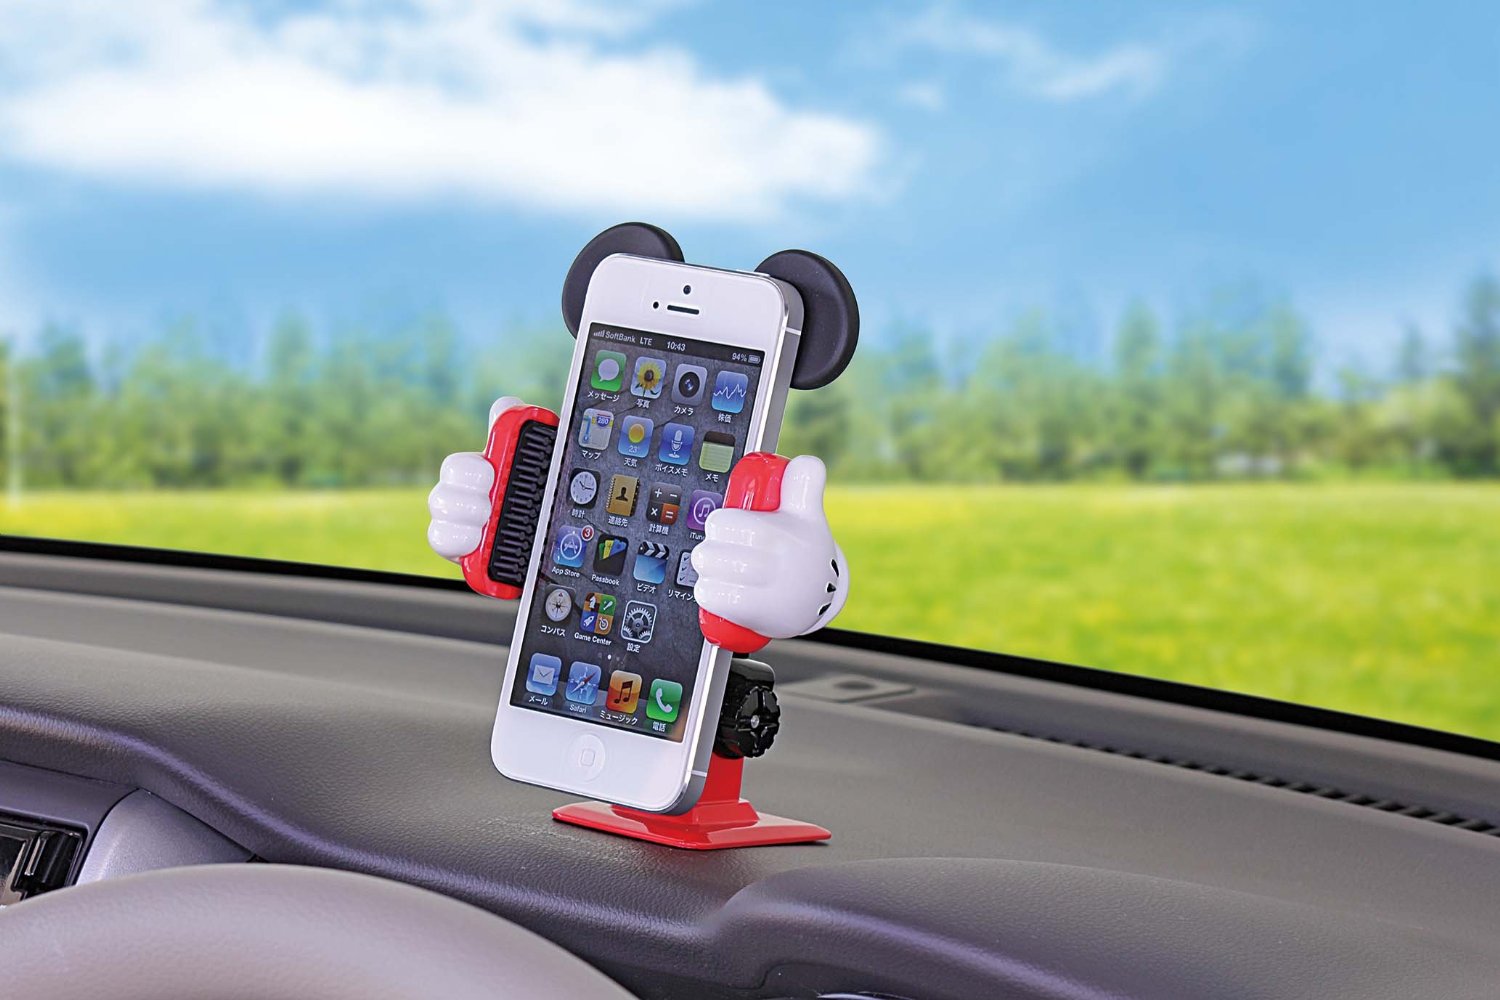 Keep Your Phone Secure and Hands Free with this Mickey Phone Holder